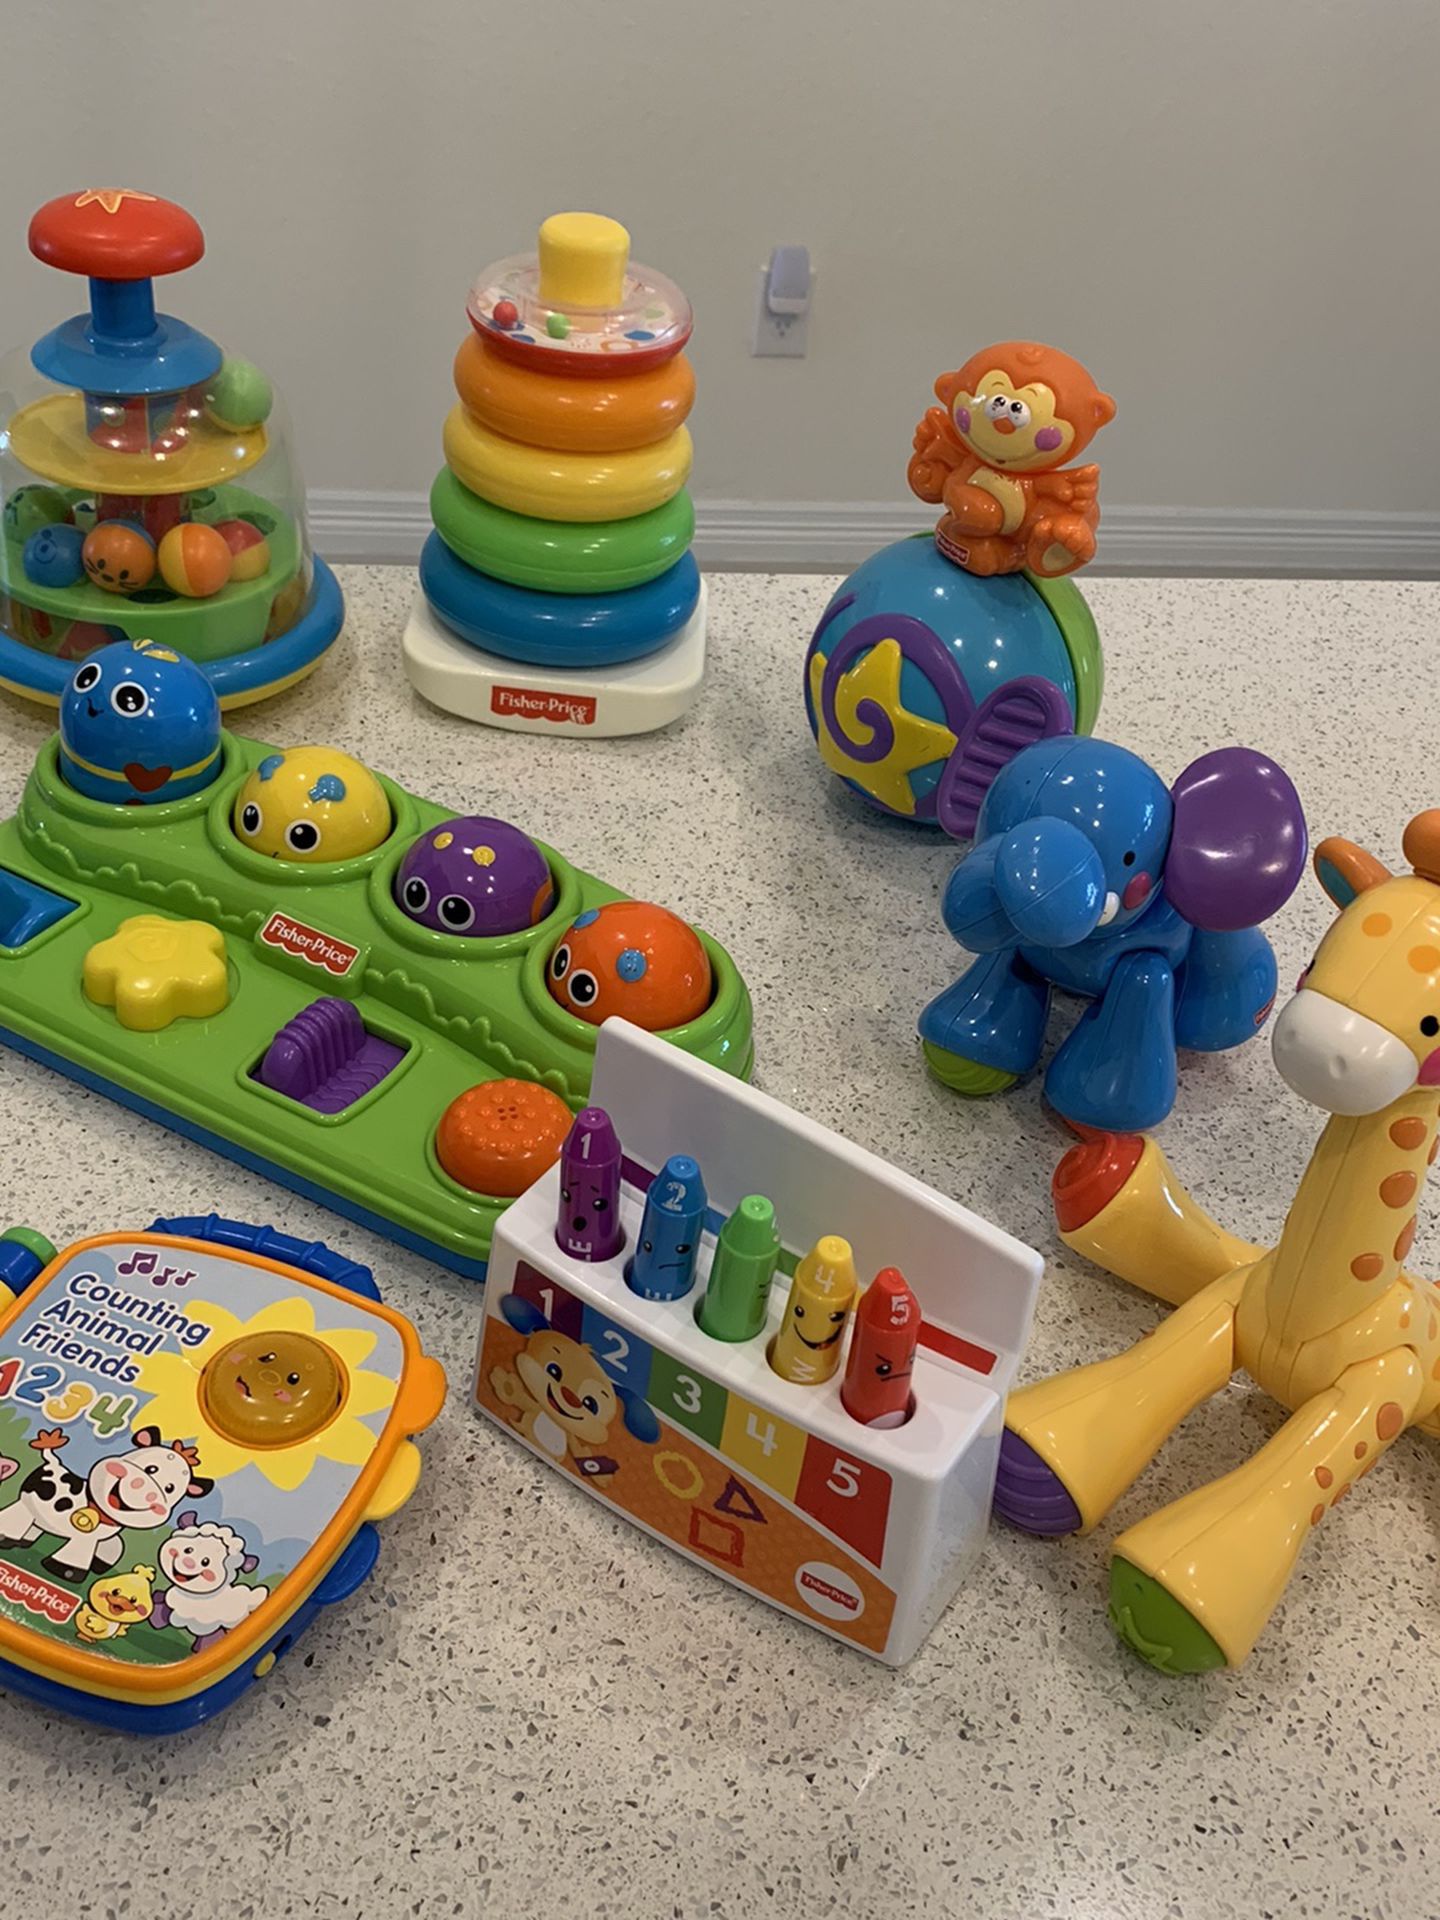 Baby’s Toys (8 pieces)